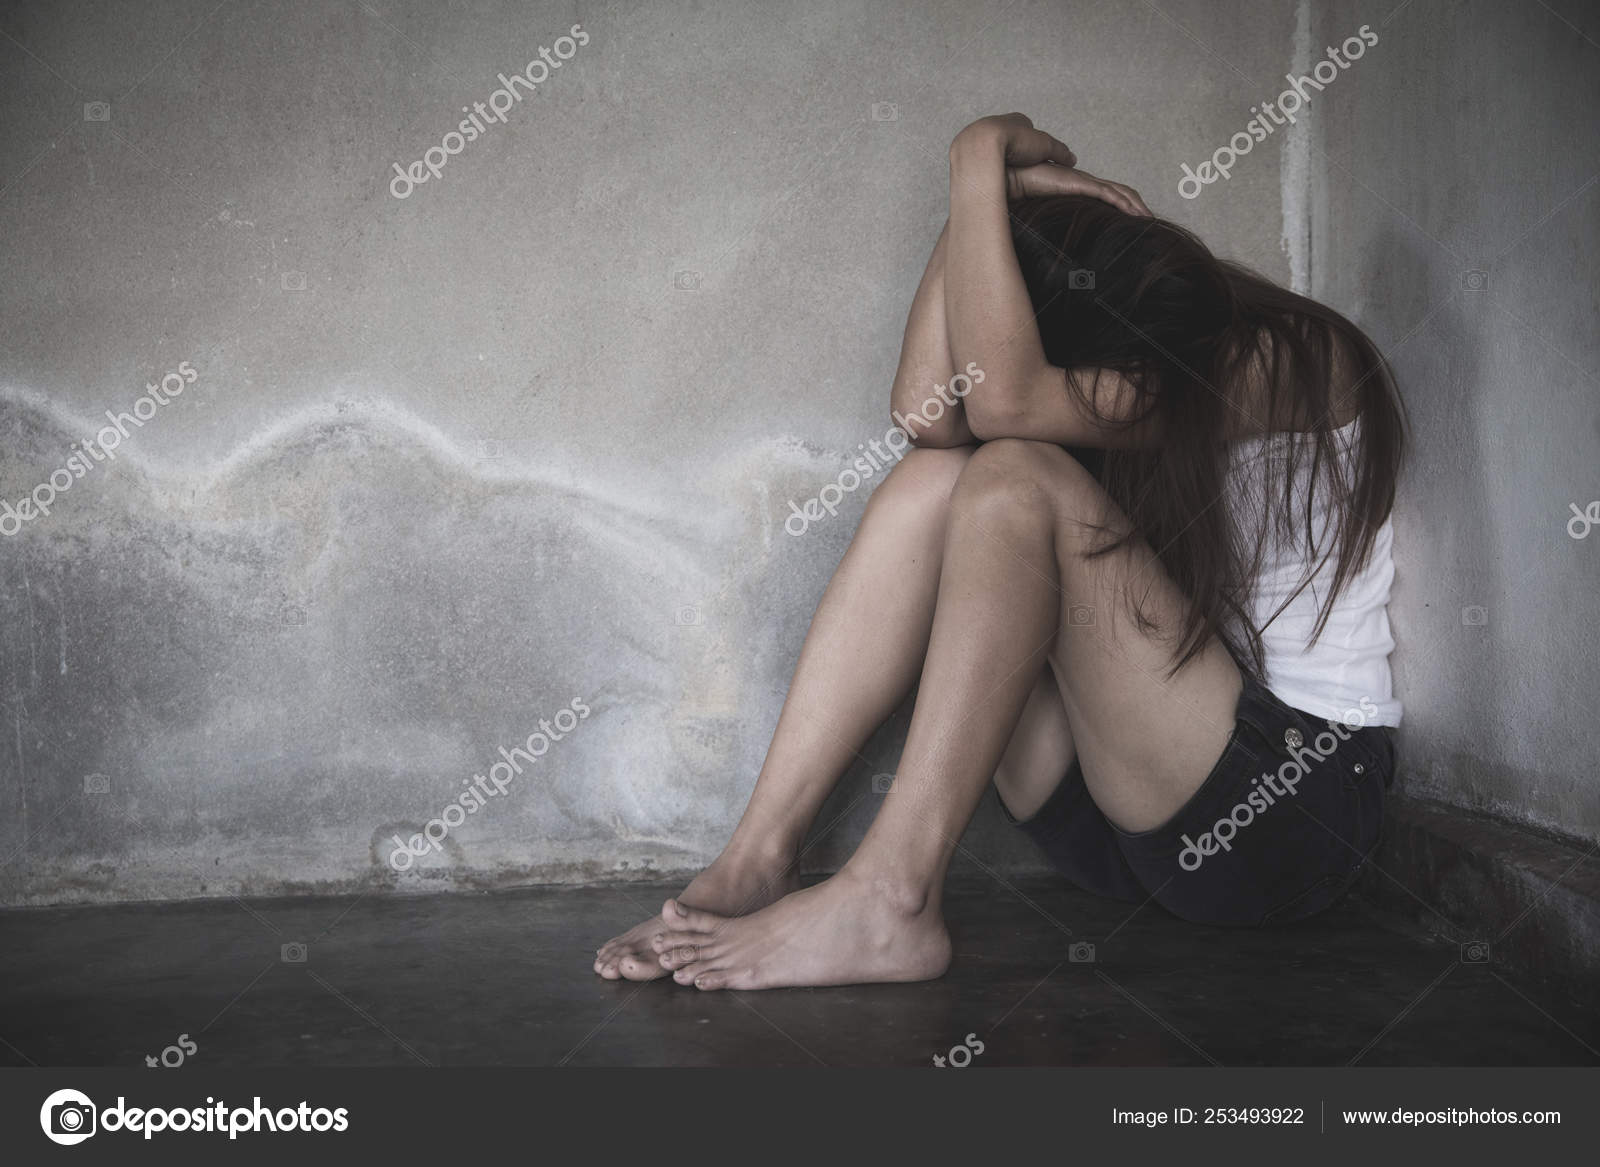 A Woman Lying Down on the Floor Looking Depressed · Free Stock Photo